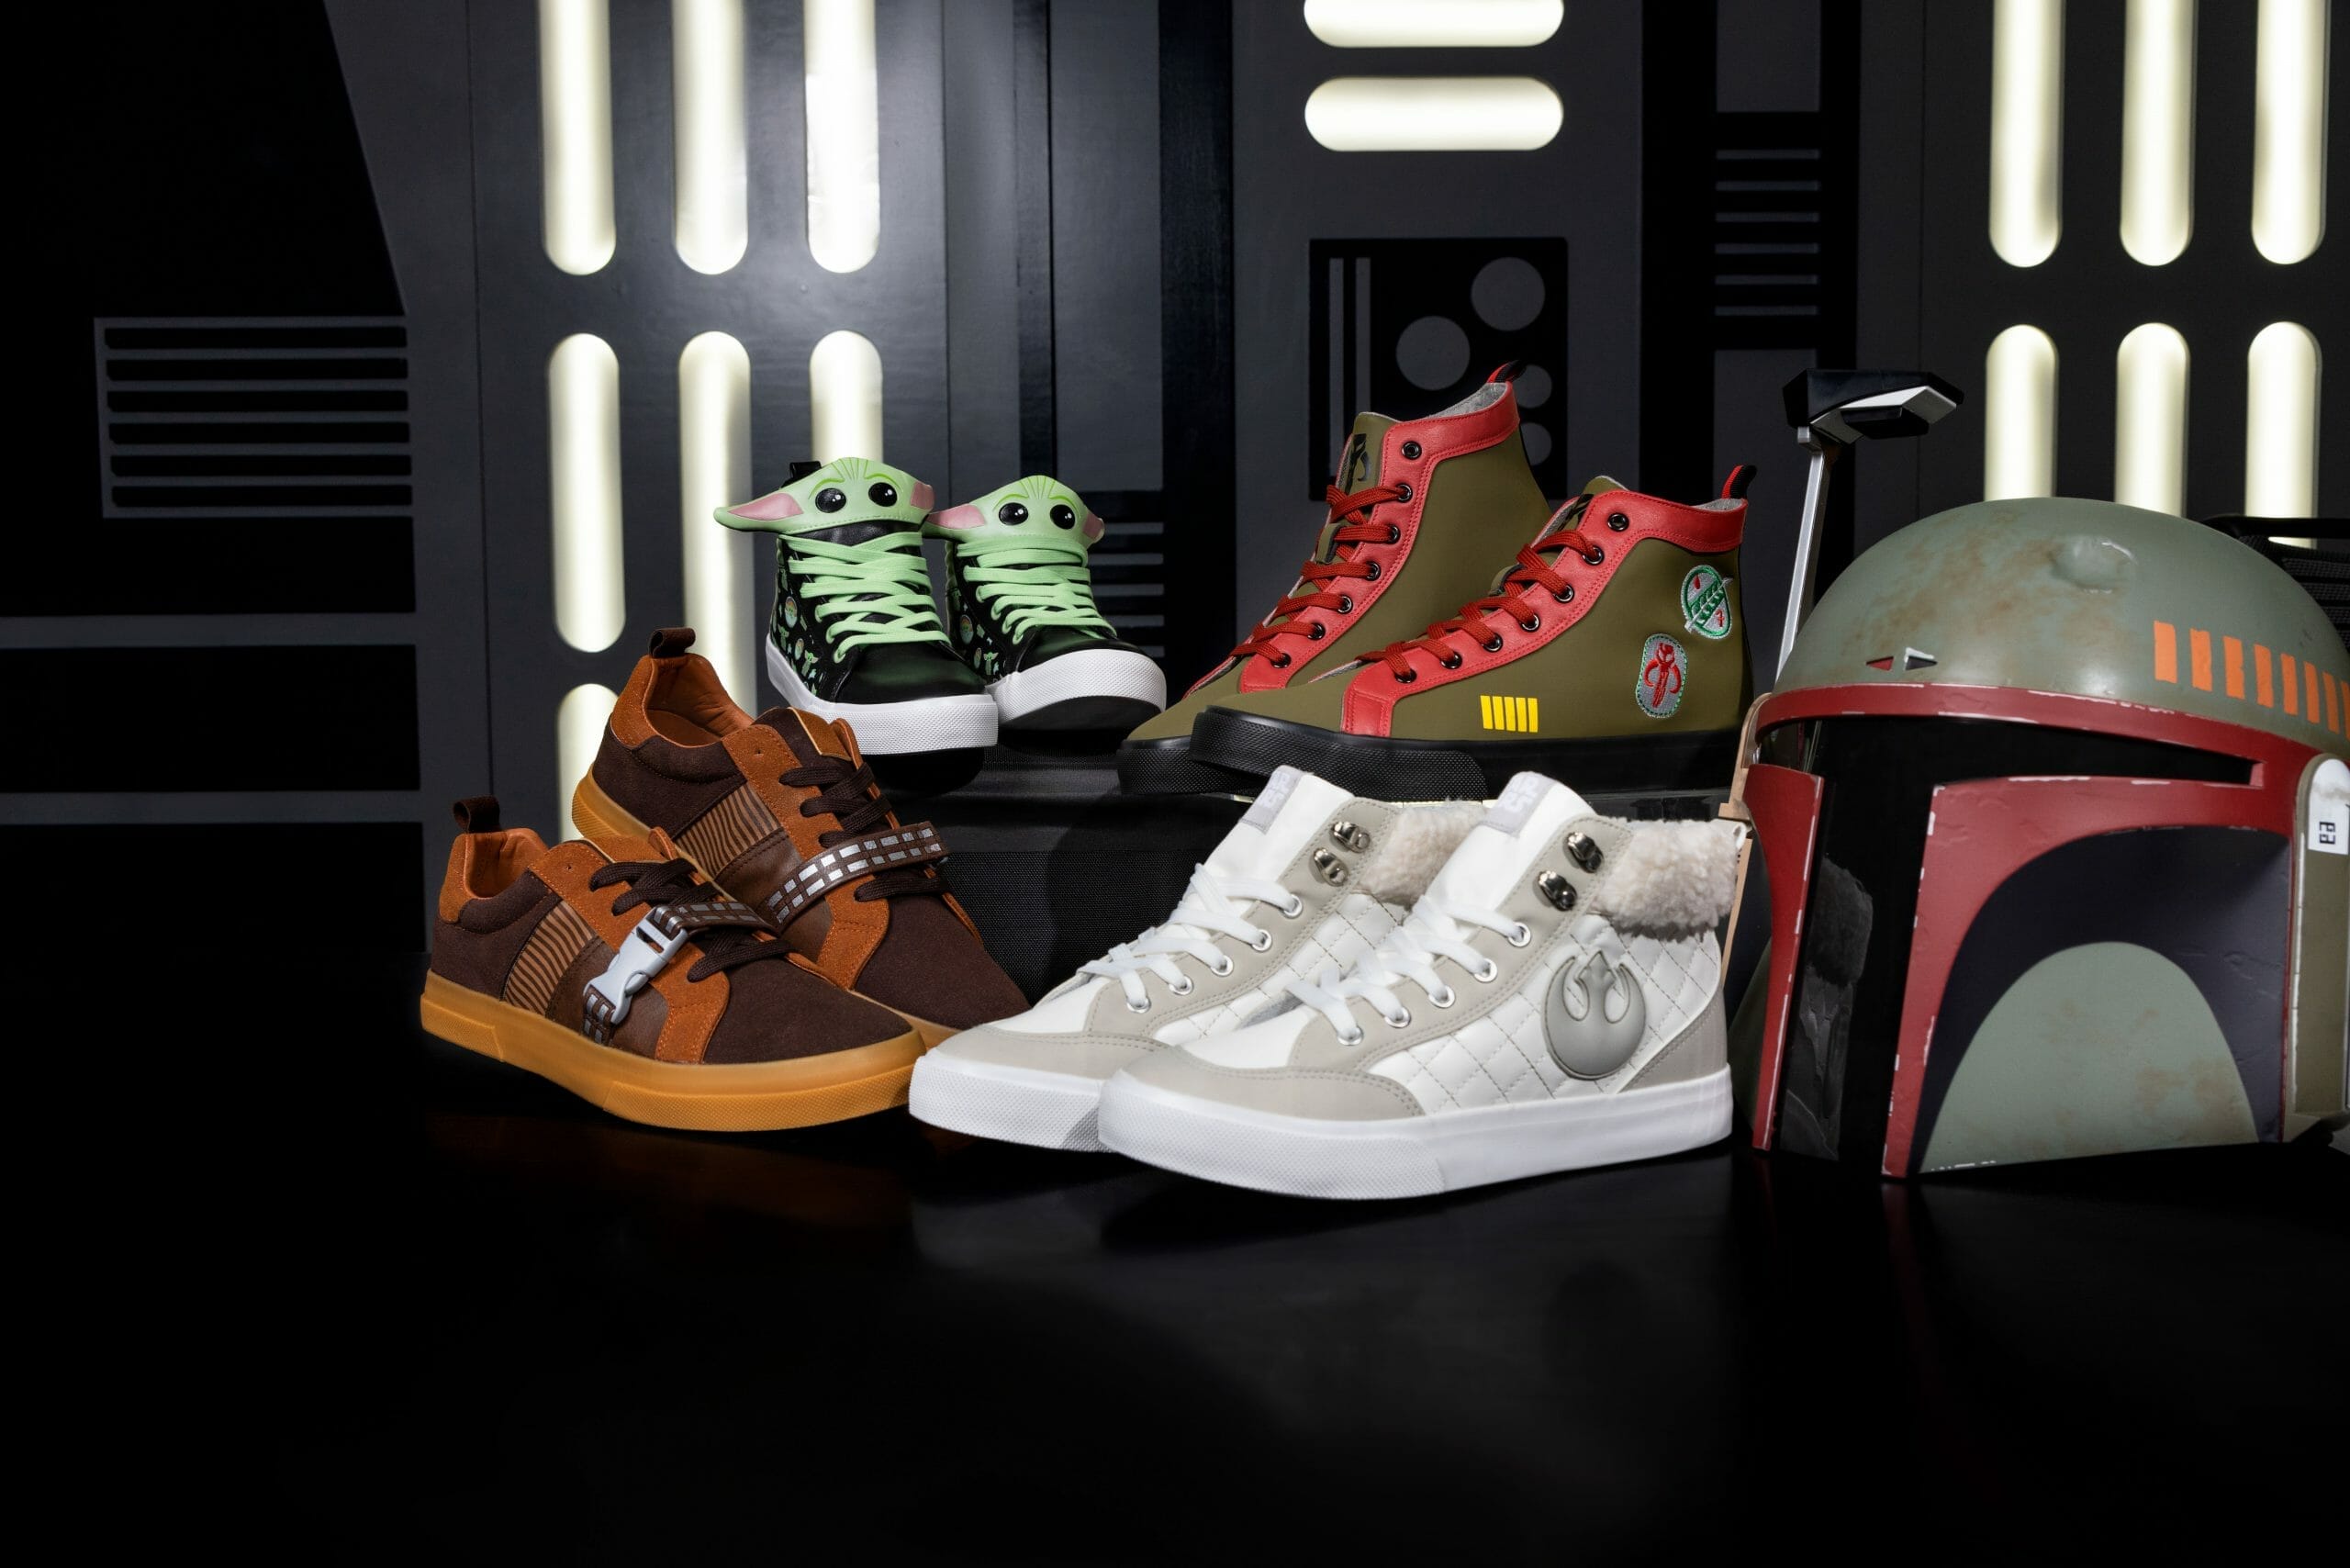 Star Wars shoes